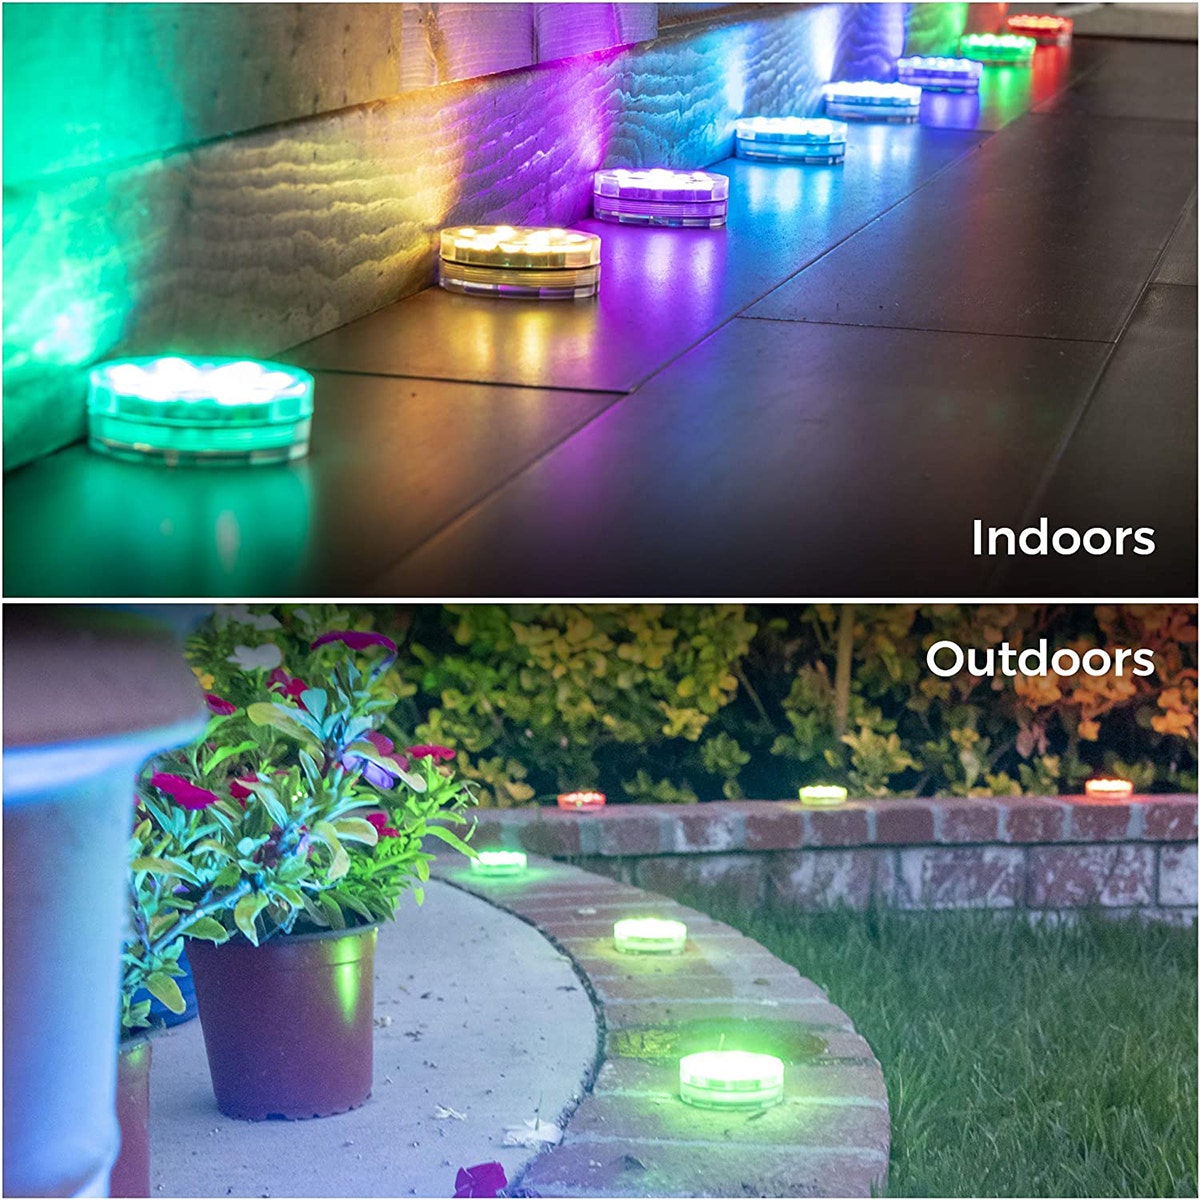 4pk EFX Submersible LED Lights With Remote Waterproof Underwater Color Changing